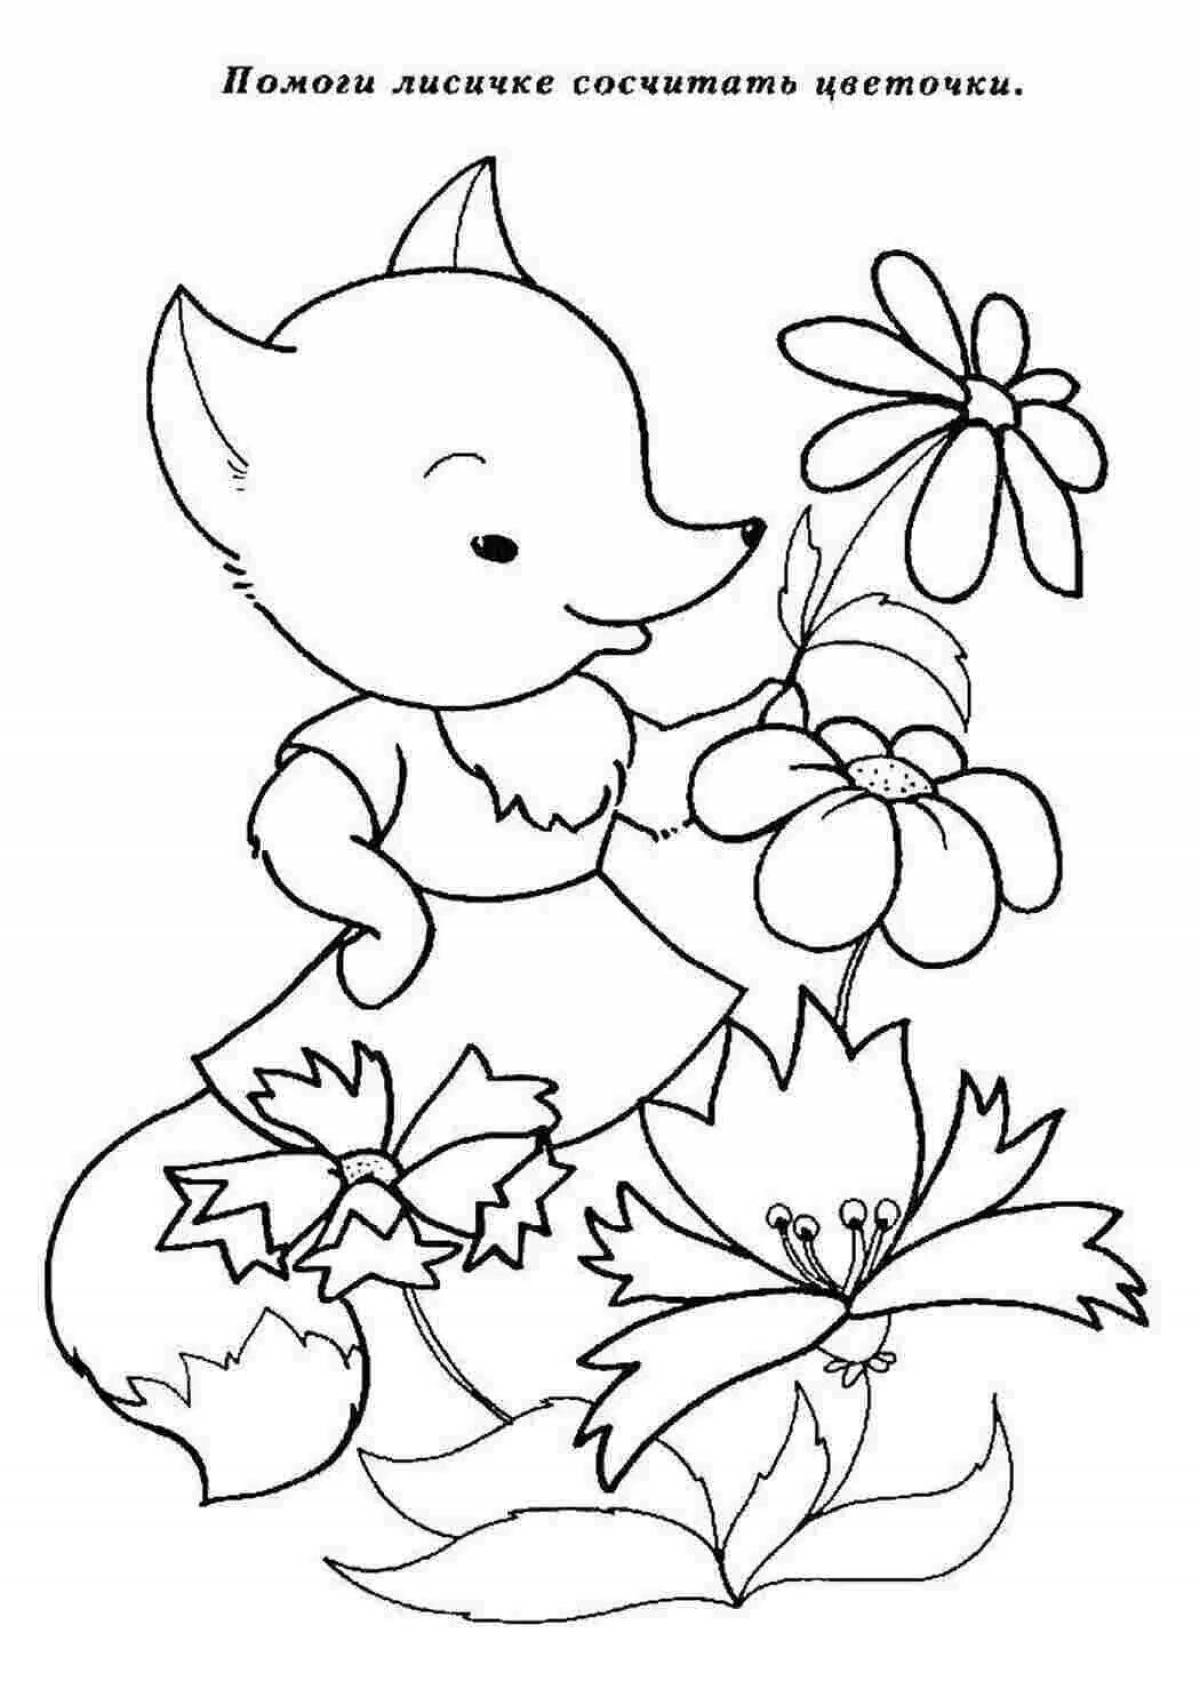 Coloring book playful fox for children 4-5 years old